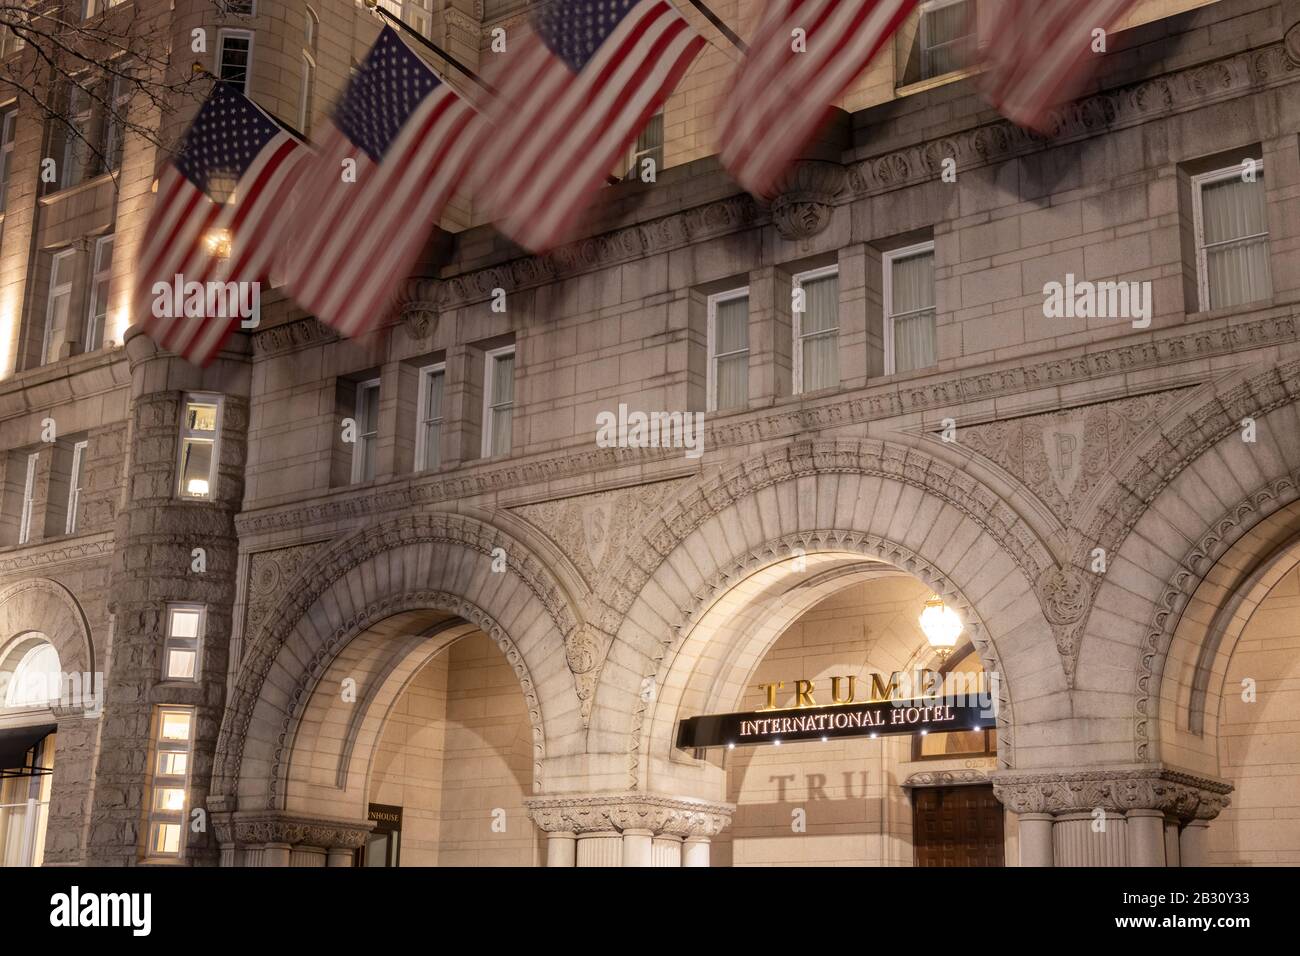 Trump International Hotel sign in-focus at the main entrance on Pennsylvania Ave in Washington, D.C. with American flags waving above at night. Stock Photo